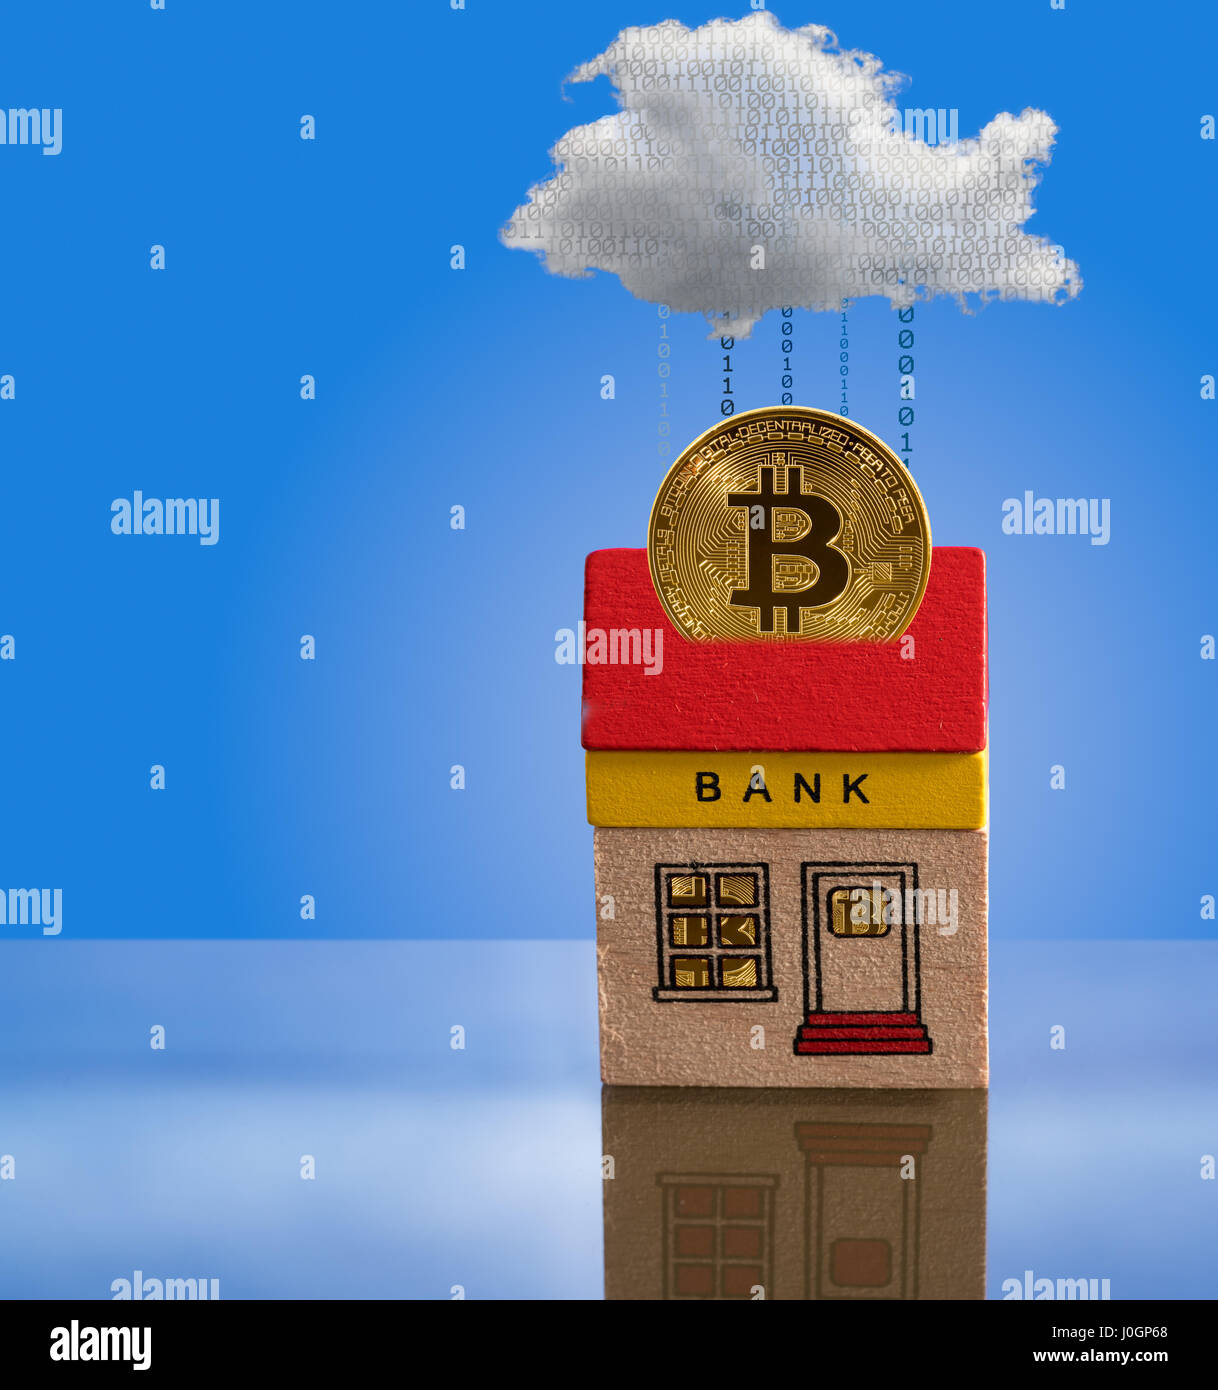 Toy bank building with bitcoin assets Stock Photo